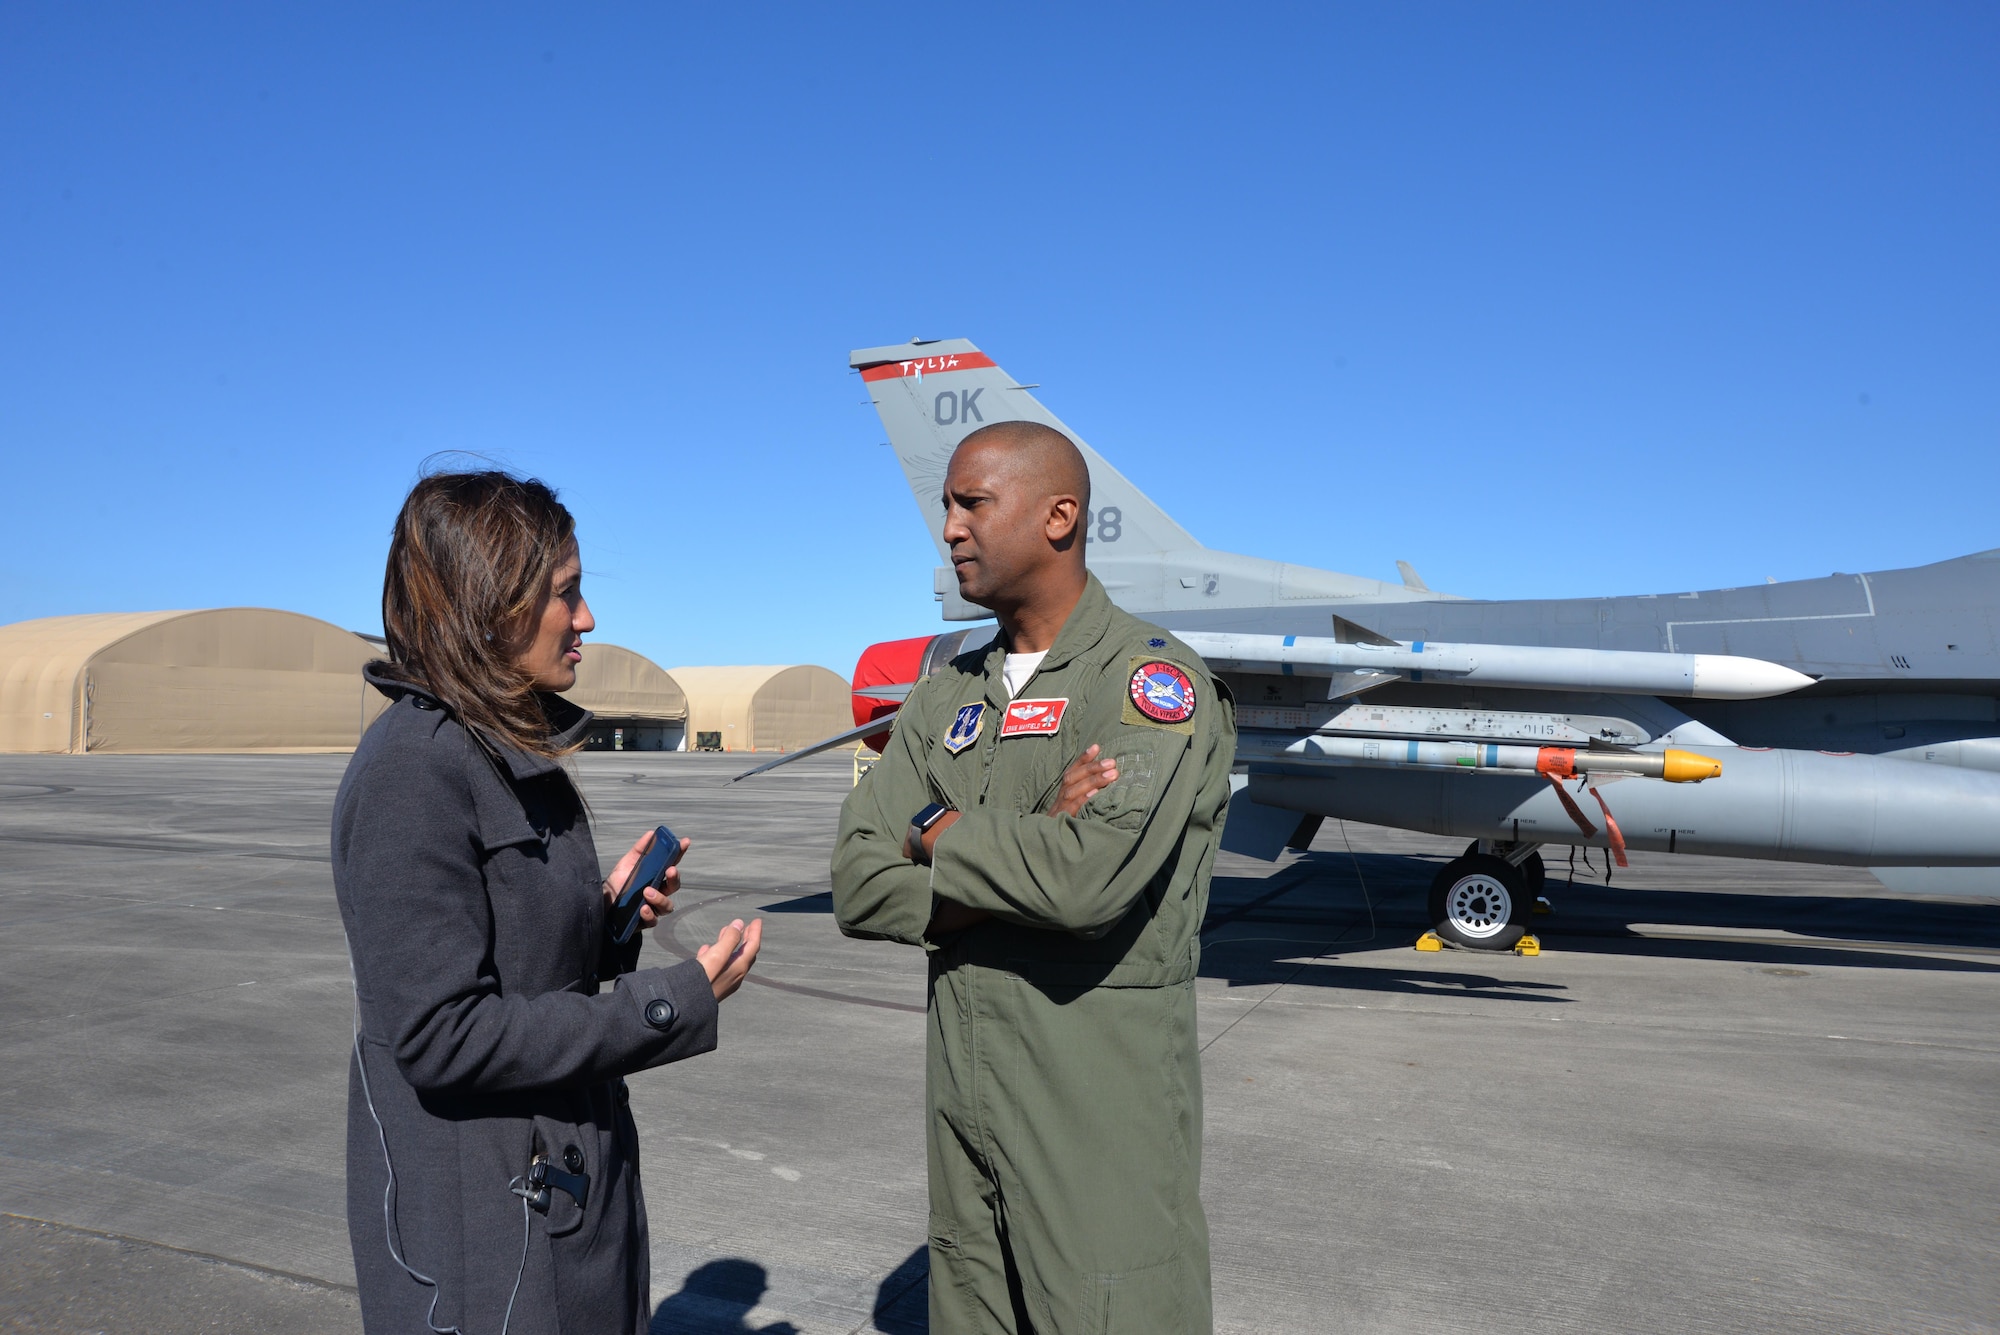 Texas Civil Air Patrol Wing Maj. Ken Wiggins talks with Houston Chronicle business reporter Andrea Rumbaugh about CAP-oriented support during a Super Bowl LI aerospace-security related media day Jan. 31 at Ellington Field Joint Reserve Base, Houston, Texas. Representatives from several agencies came together to speak about their roles in helping support air defense during Super Bowl LI Feb. 5. (Photo released by Mary McHale)